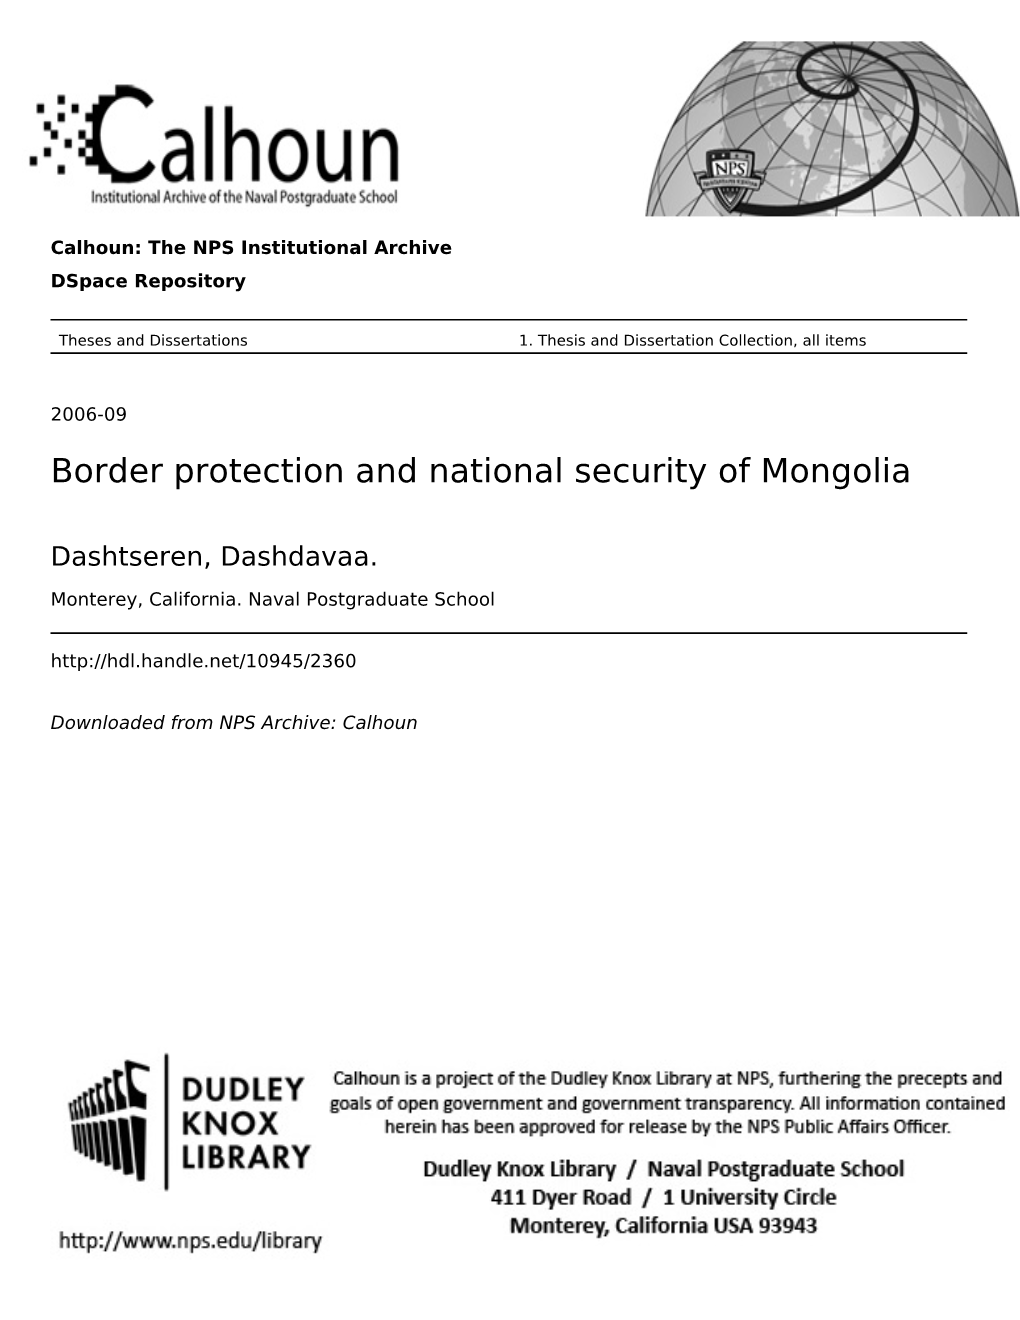 Border Protection and National Security of Mongolia